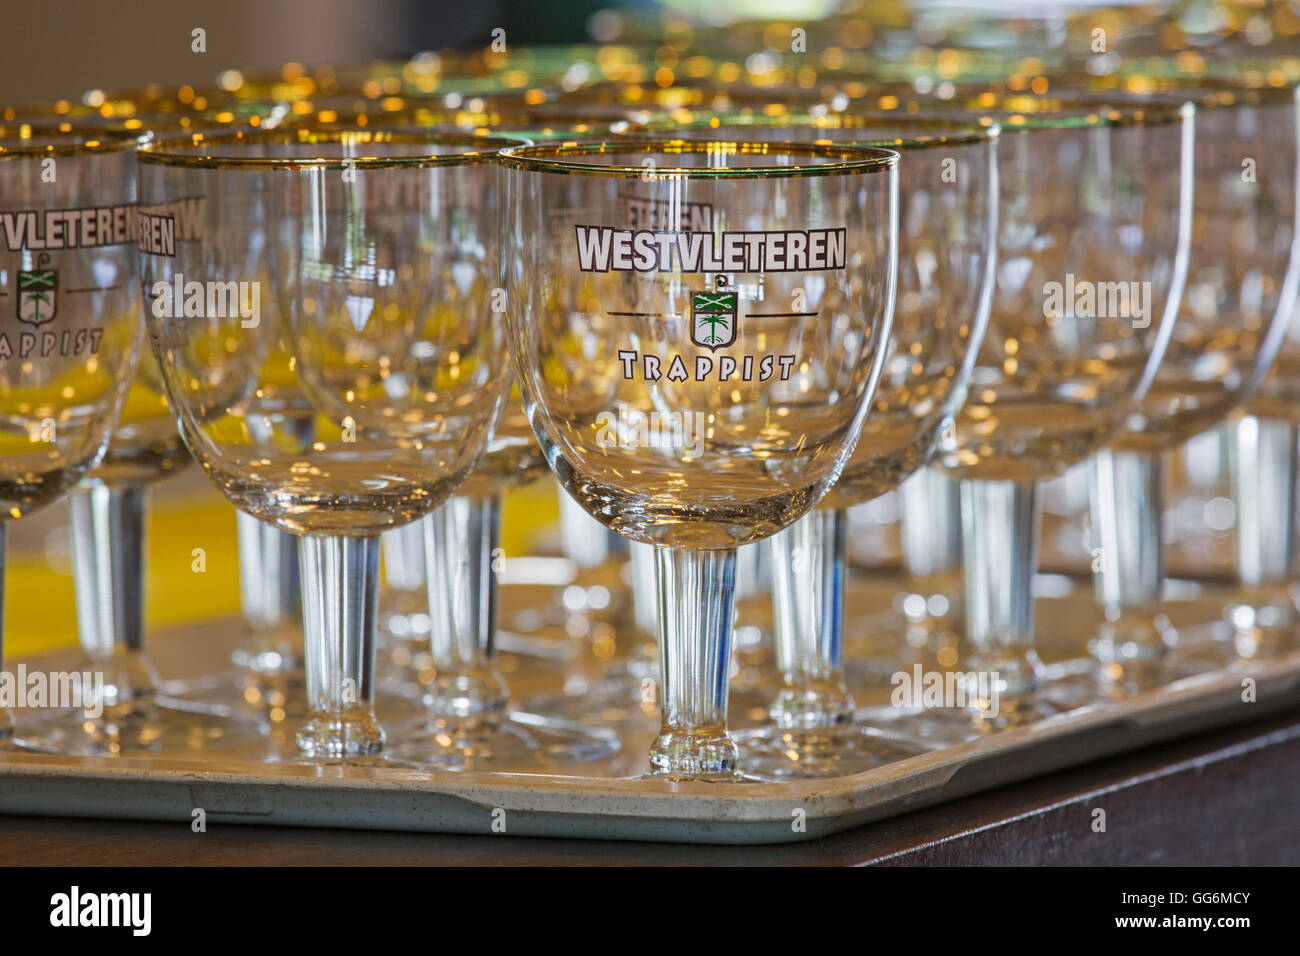 Tray with empty Trappist Westvleteren beer glasses in café Stock Photo